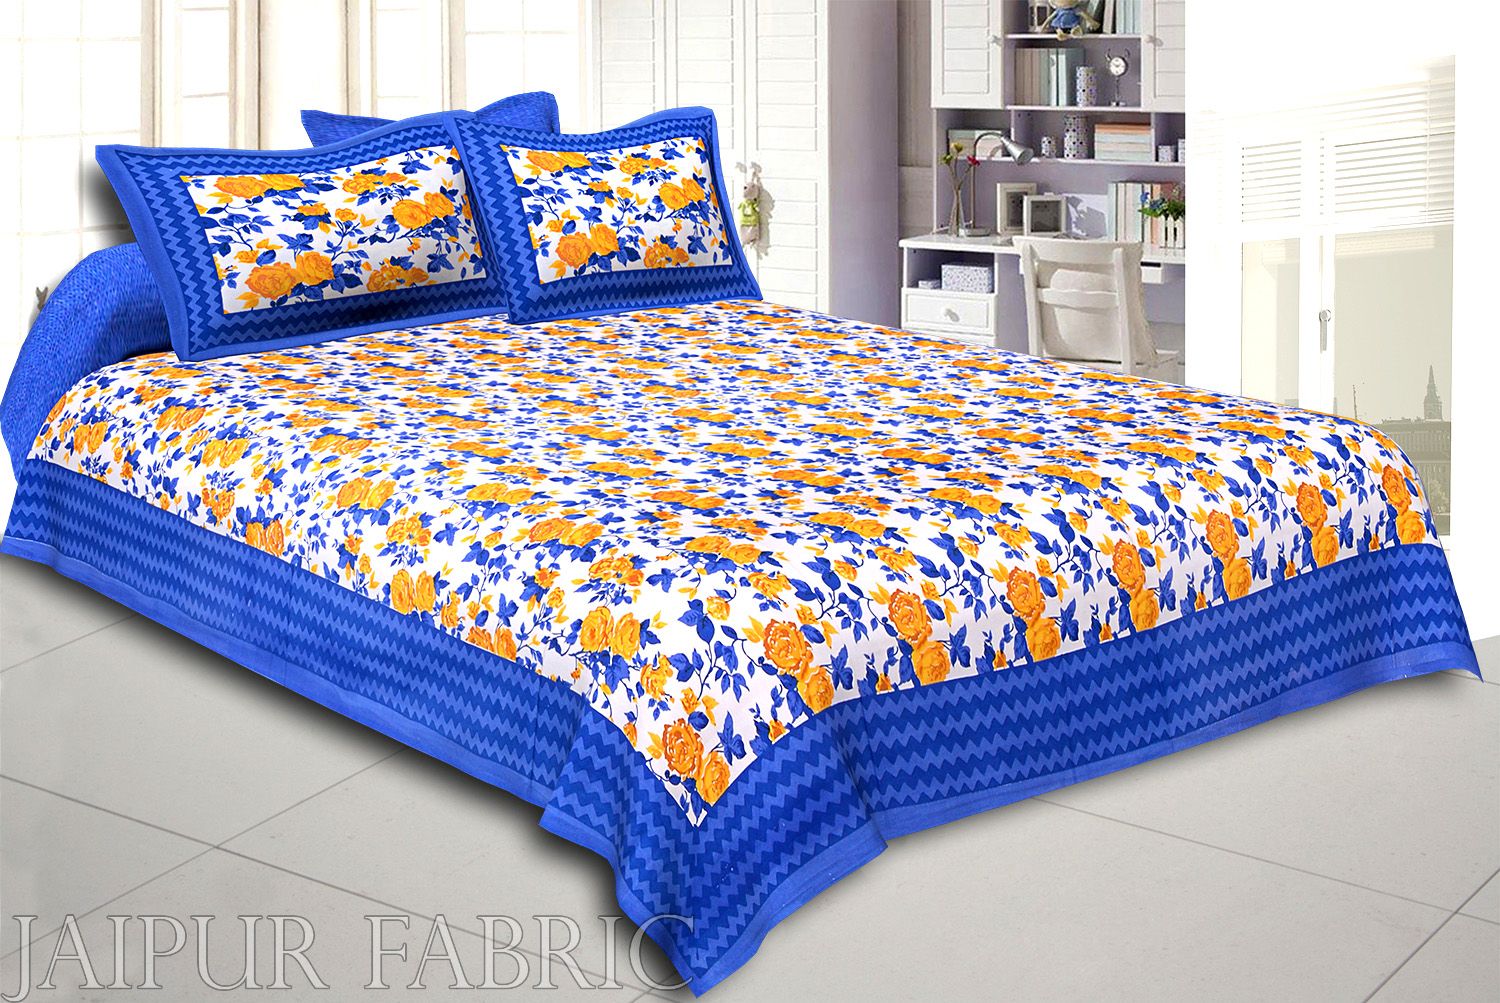 Blue Wavy Border and Floral Print Cotton Double Bed Sheet